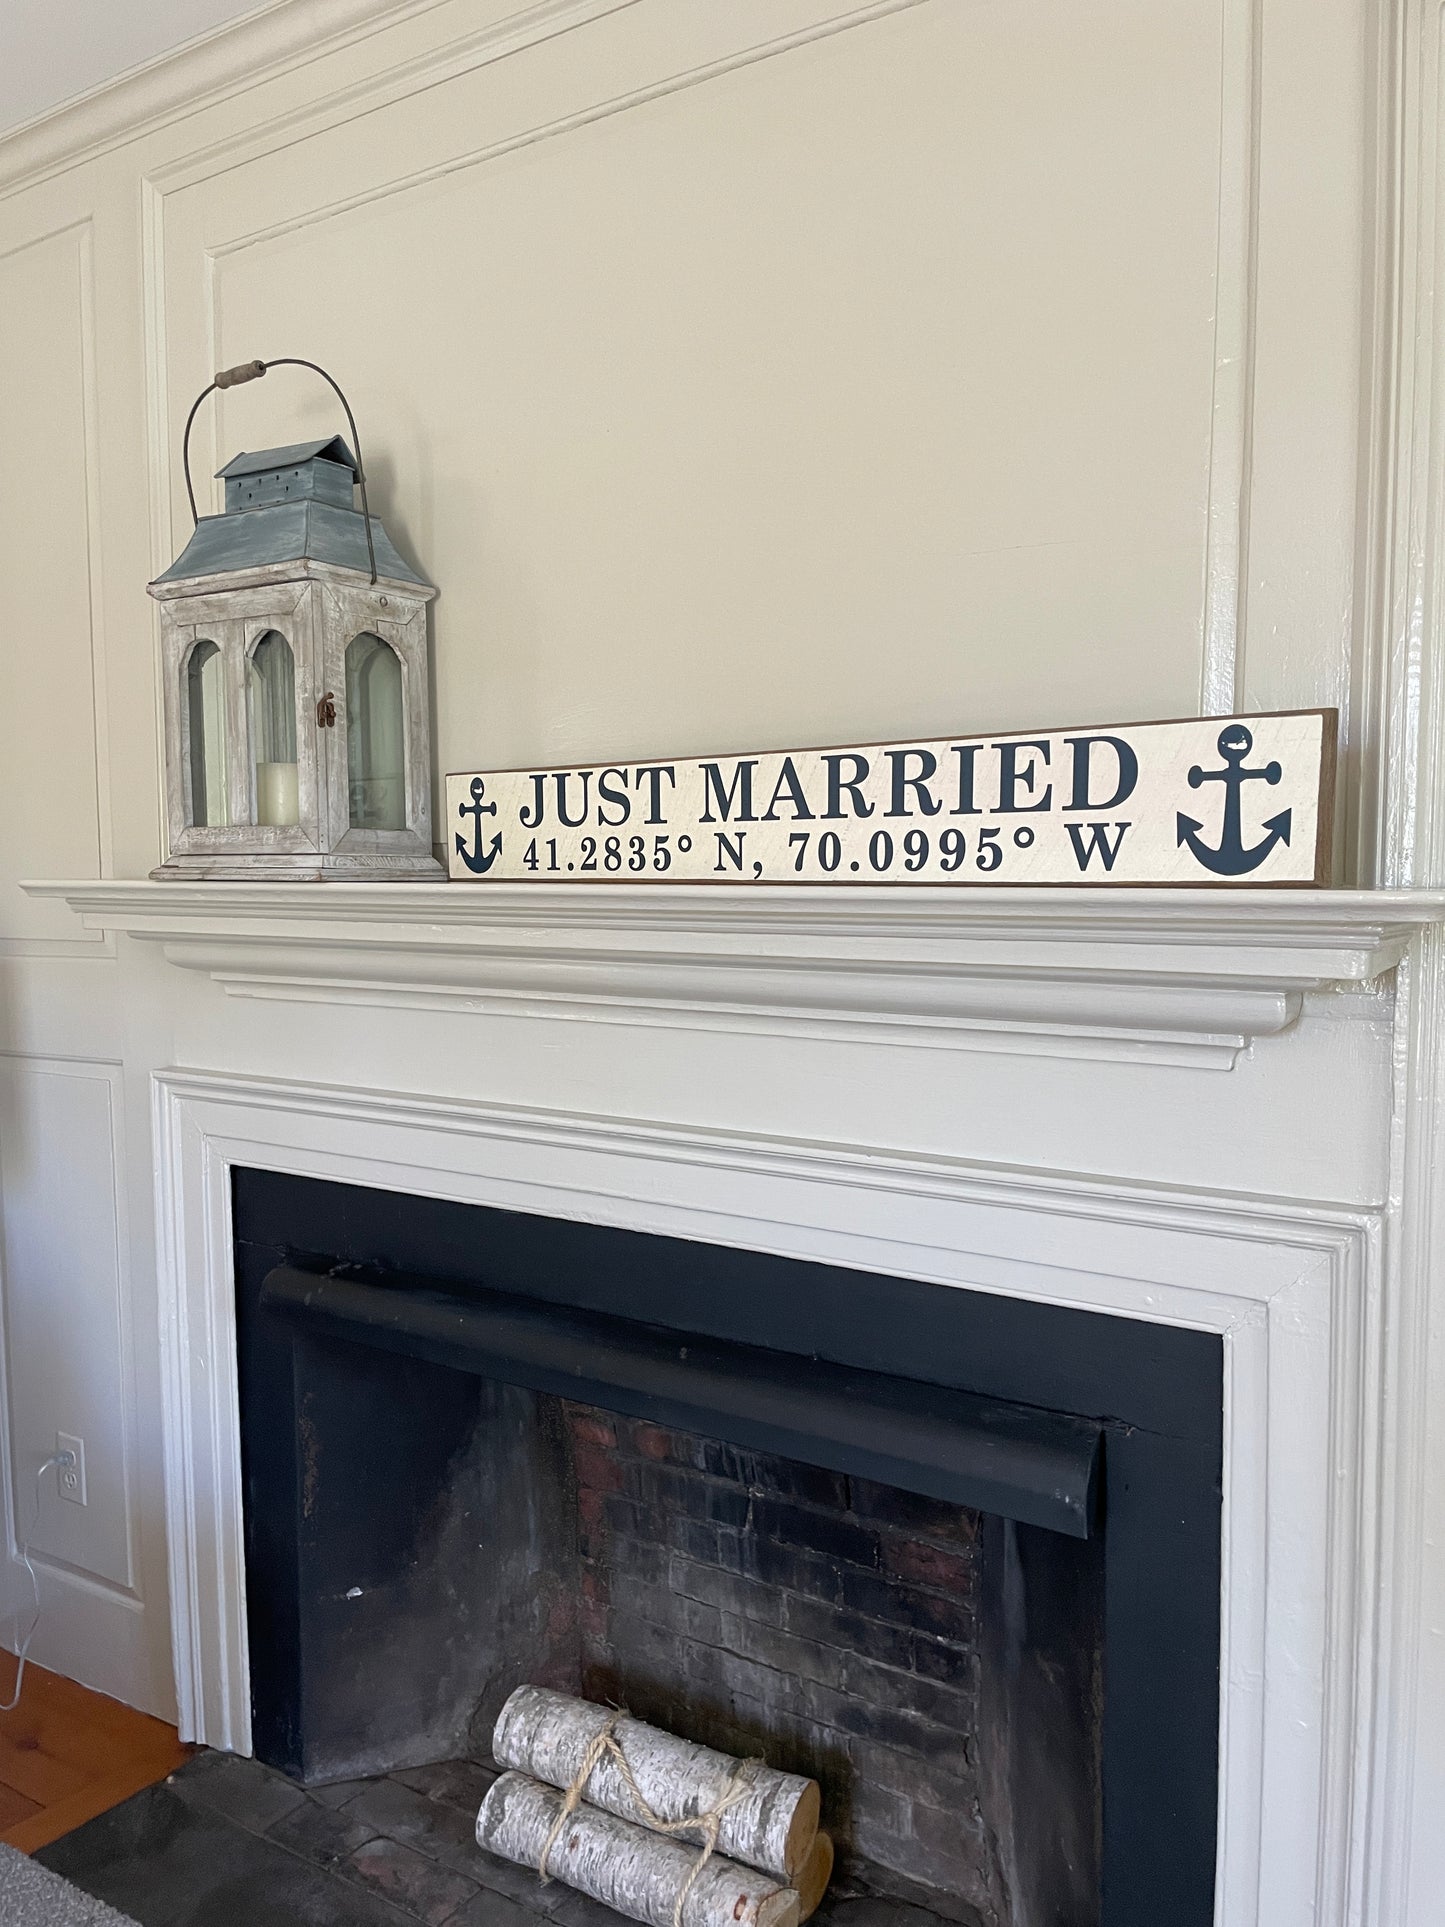 JUST MARRIED BARN WOOD SIGN